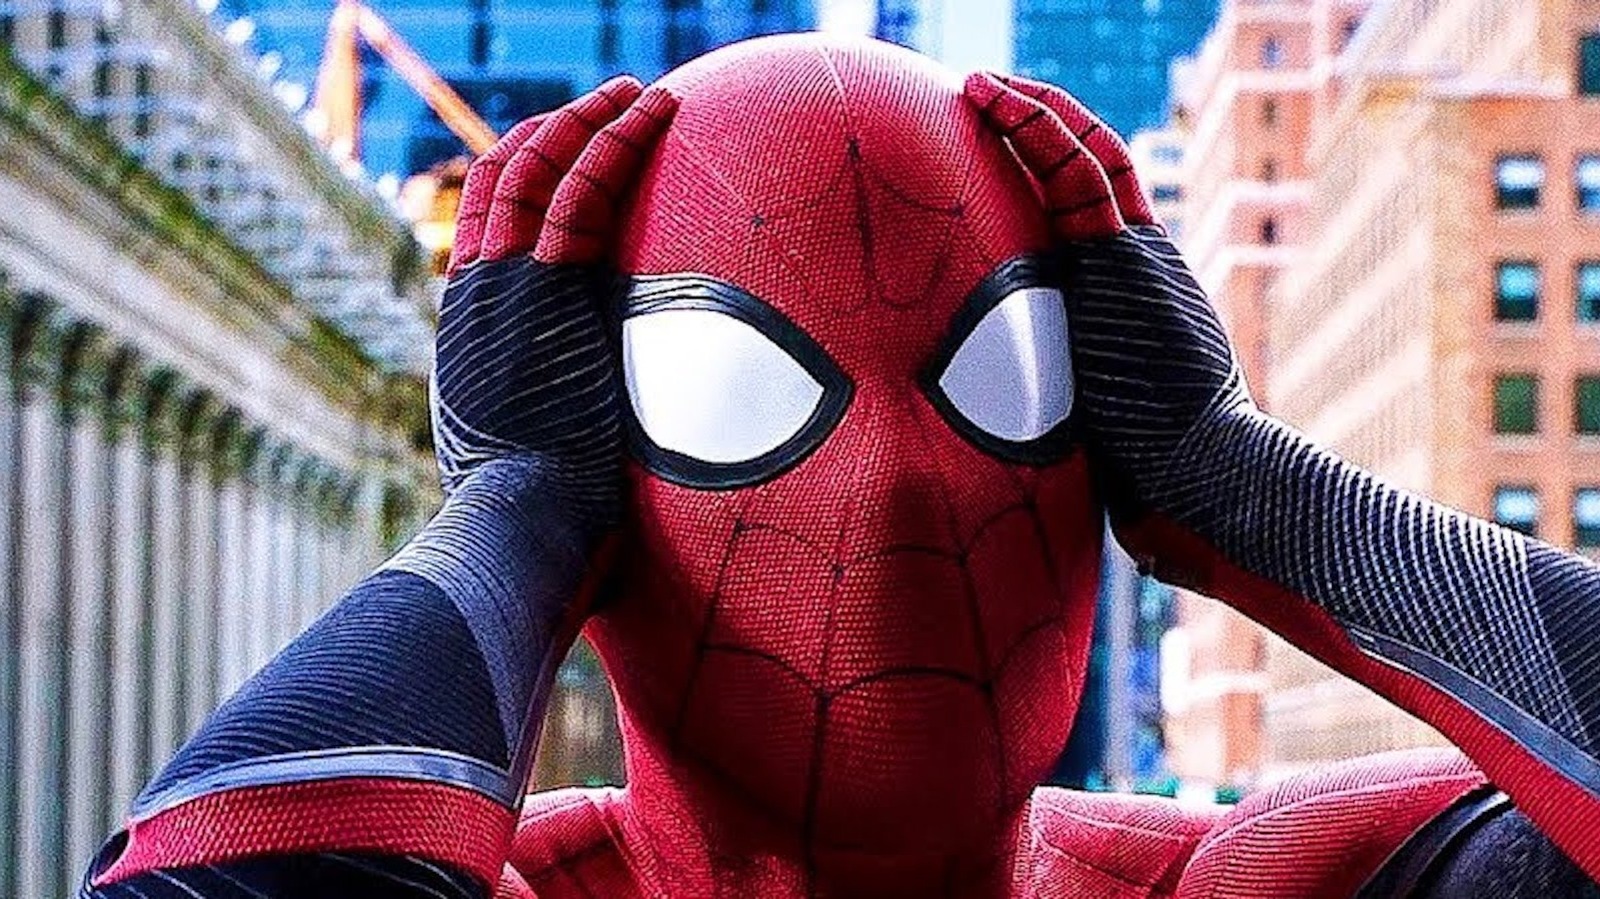 The Latest Look At Spider-Man: No Way Home Has Fans Wondering About His